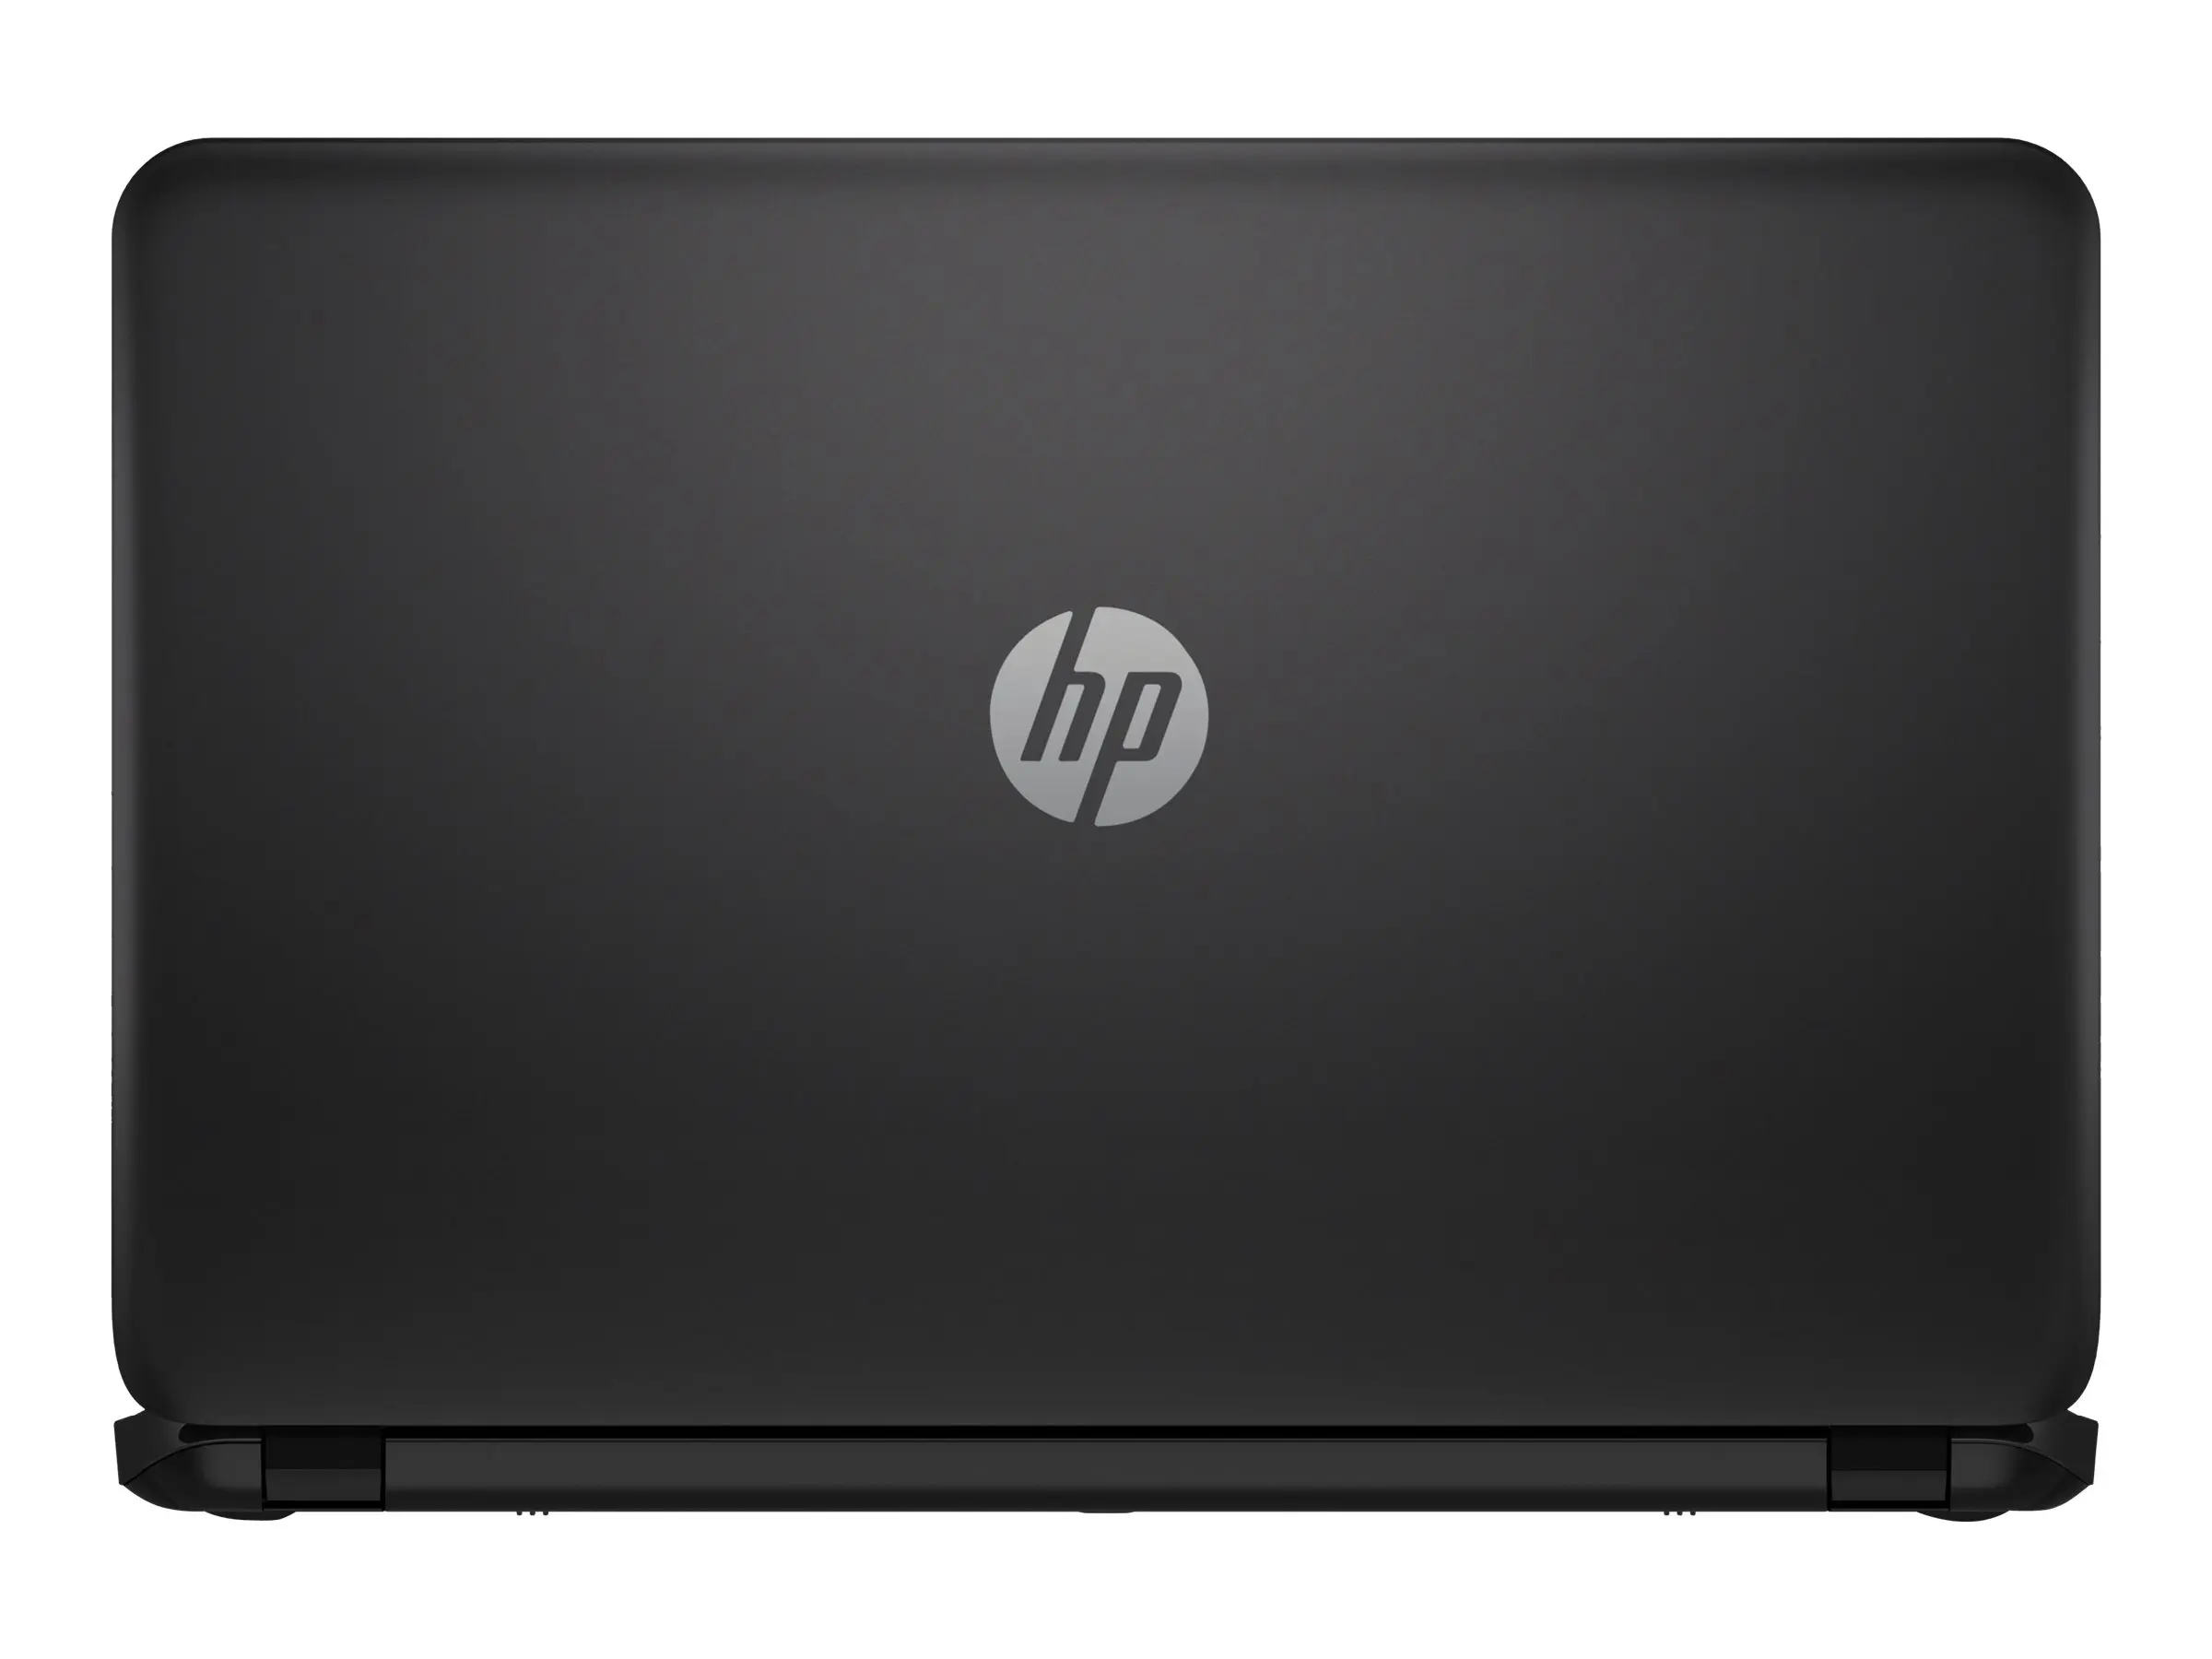 hewlett packard hp 255 g3 notebook pc - How many inches is HP 255 G8 notebook PC